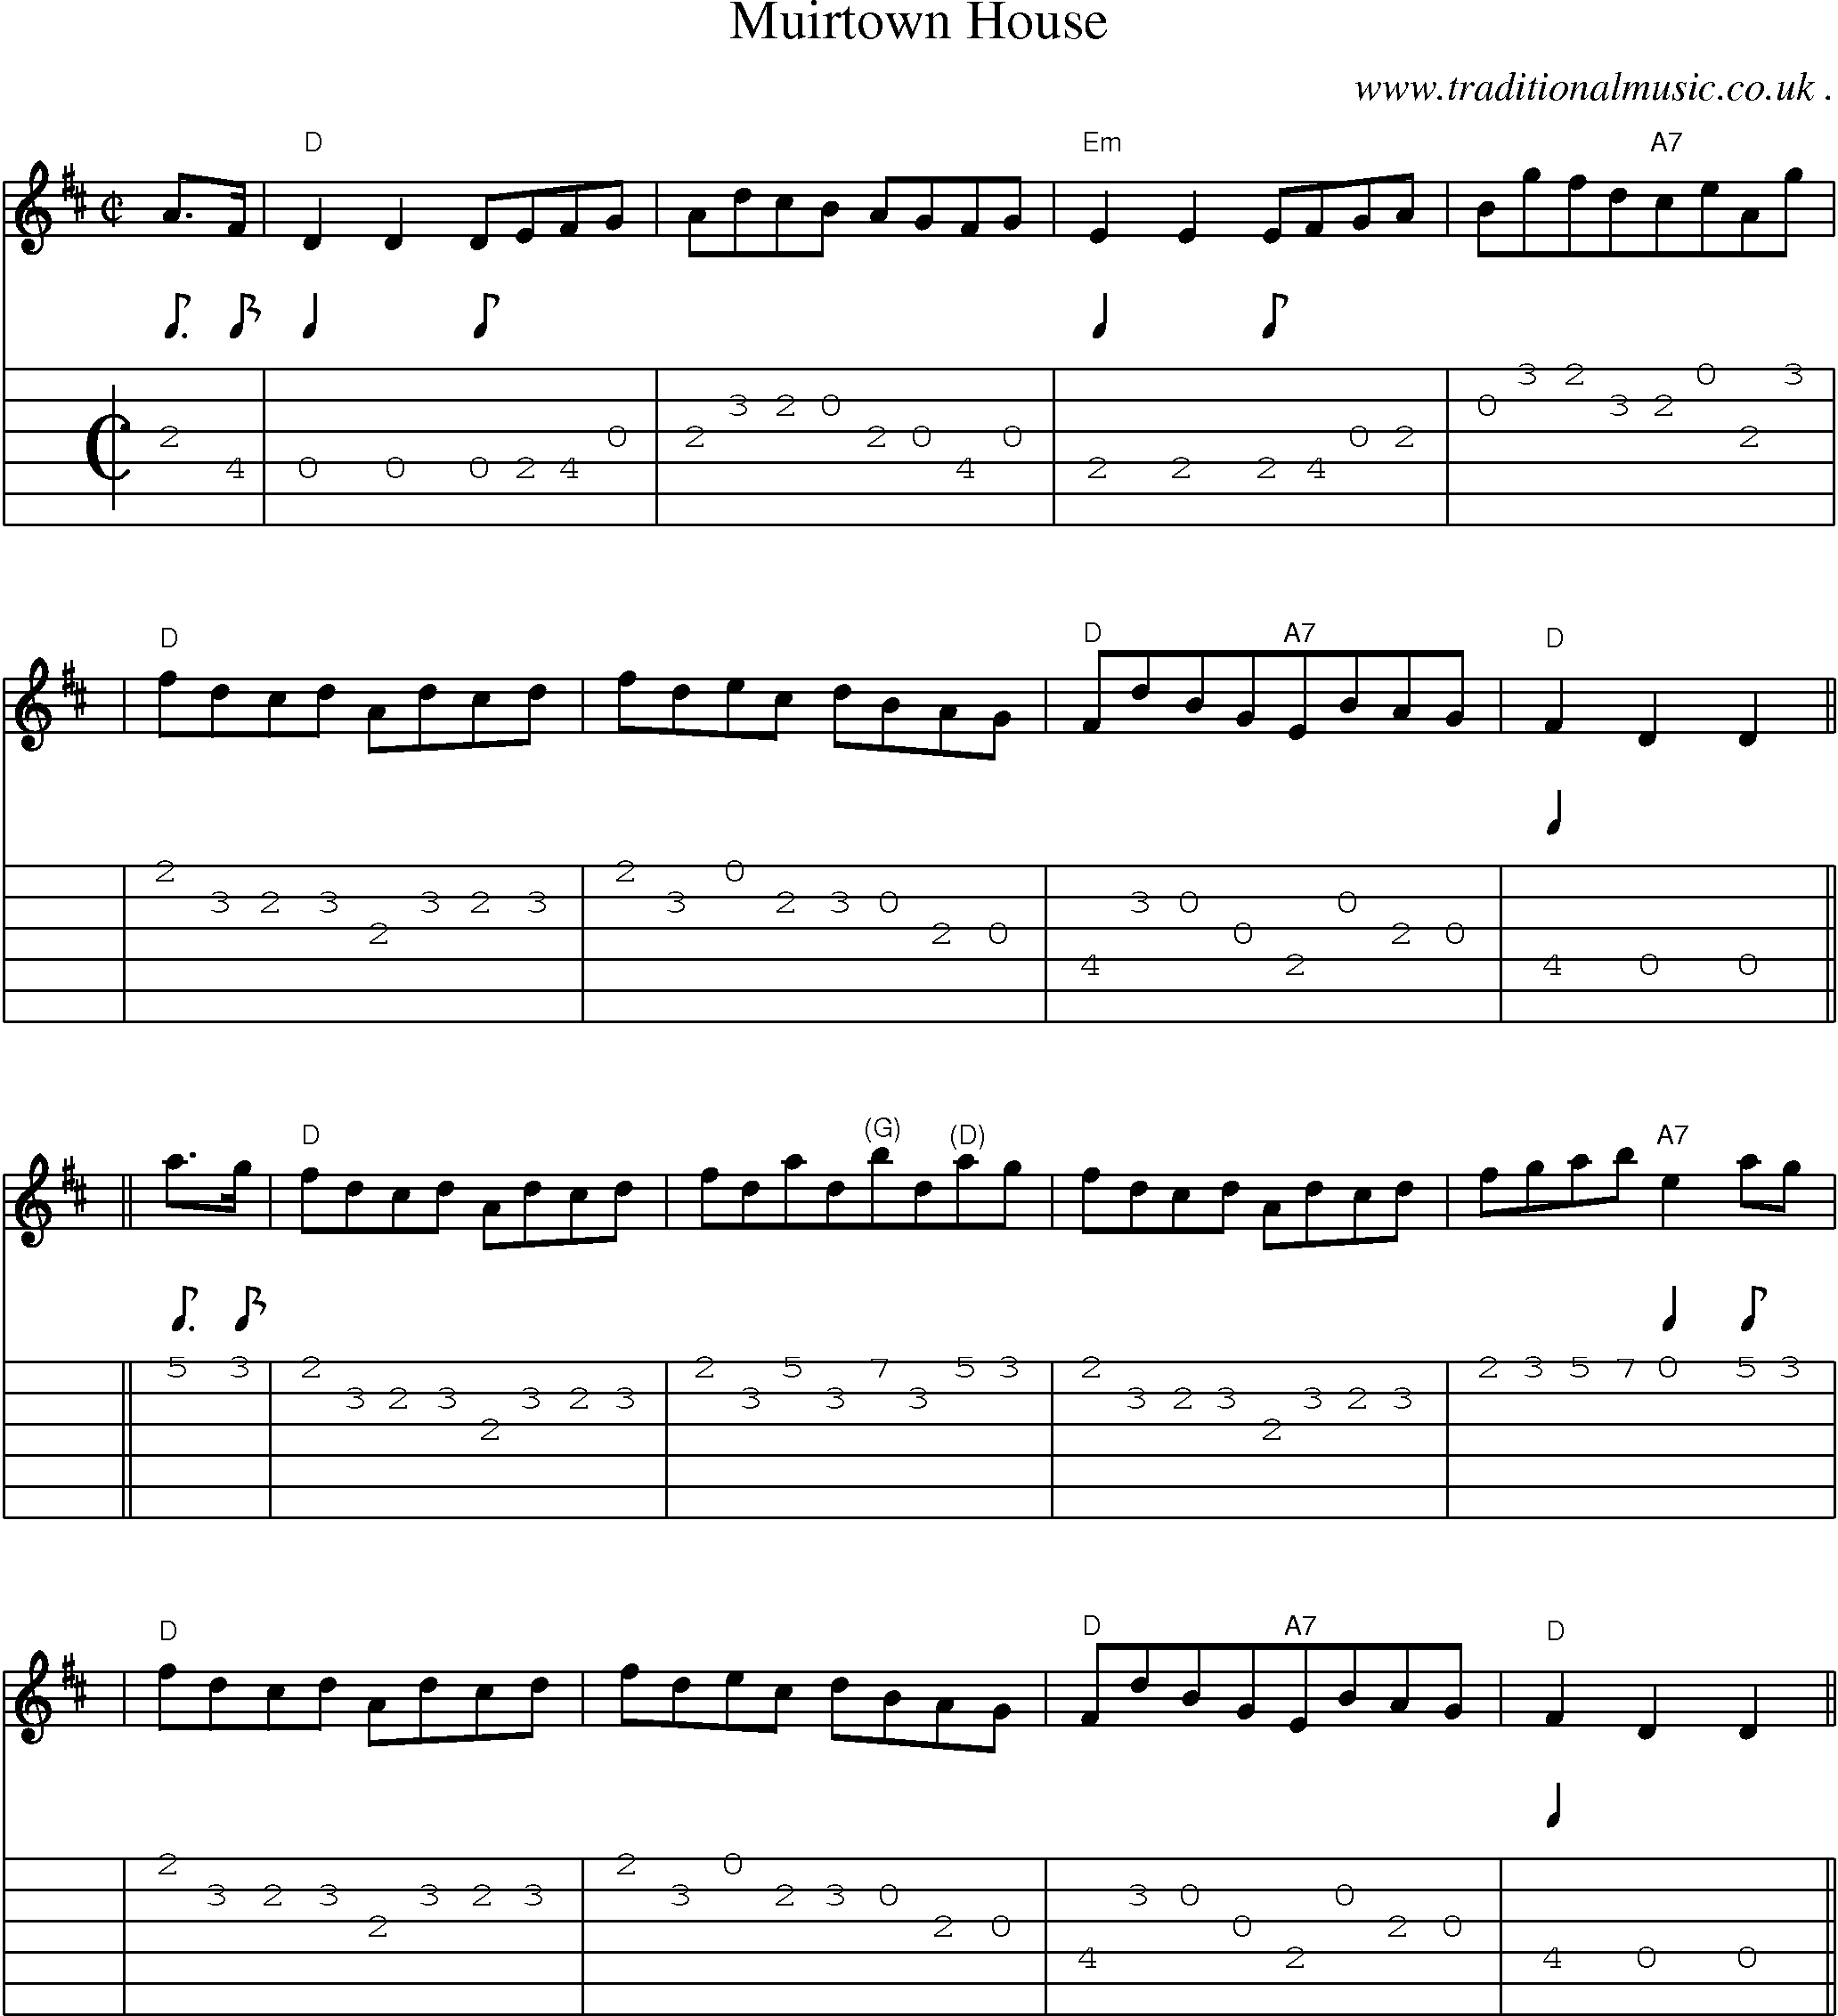 Sheet-Music and Guitar Tabs for Muirtown House